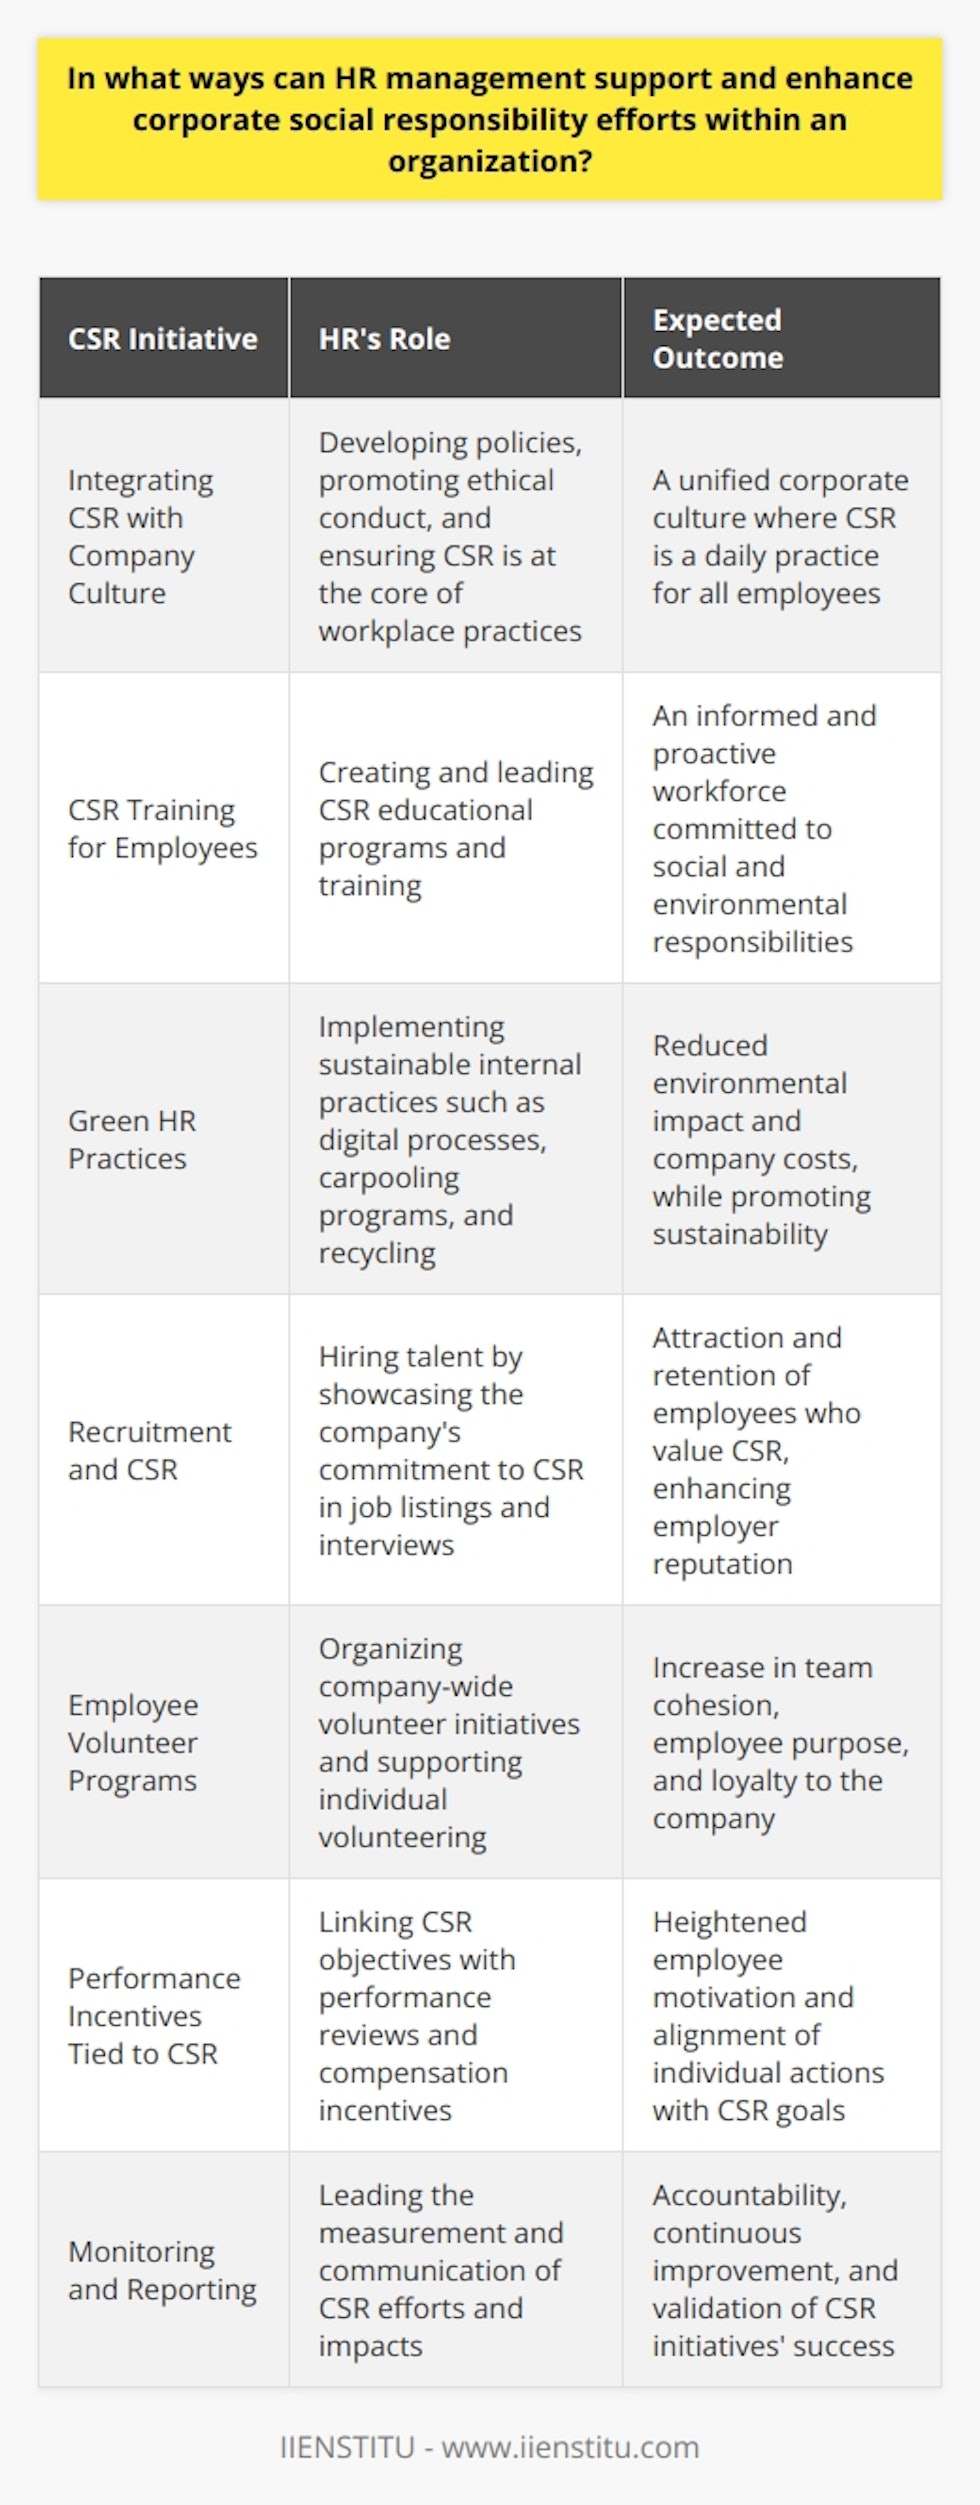 The Role of HR Management in CSR EffortsHuman Resources (HR) departments are typically recognized for their roles in recruitment, training, and maintaining employee satisfaction. However, their potential for driving Corporate Social Responsibility (CSR) is often underutilized. Strategic involvement of HR in CSR can lead to a multitude of benefits for an organization, including enhanced reputation, increased employee engagement, and improved sustainability.Integrating CSR with Company CultureIntegrating CSR into the core values of a company's culture is imperative. HR plays a pivotal role in weaving CSR into the fabric of the organization by developing policies that promote ethical conduct and social responsibility. By doing so, HR ensures that CSR becomes a daily practice for every employee, rather than occasional initiatives detached from the main business.CSR Training for EmployeesTo empower employees to make decisions that are in line with CSR objectives, HR can lead the development of education programs that highlight the importance of social and environmental responsibility in the workplace. Training sessions that discuss the company's CSR strategies and the role of employees in achieving these objectives can lead to a more informed and proactive workforce.Green HR PracticesSustainability can begin internally with green HR practices. Actions such as reducing paper use by moving to digital systems, encouraging carpooling or the use of public transportation among employees, or implementing office recycling programs can have significant impacts. Furthermore, these practices often lead to cost reductions for the company.Recruitment and CSRIn today's job market, many candidates prioritize companies with strong CSR policies. HR departments can attract top talent by highlighting the company's CSR commitments in job postings and interviews. By doing so, they not only grow a team of socially responsible employees but also enhance the organization's reputation as an employer.Employee Volunteer ProgramsCreating opportunities for employees to engage in volunteer work or community service can further enhance CSR efforts. HR can organize company-wide initiatives or support employees in individual volunteer work. These opportunities lead to a greater sense of purpose for employees and can positively impact team cohesion and company loyalty.Performance Incentives Tied to CSRIncorporating CSR goals into performance reviews and compensation packages can reinforce the connection between individual actions and the company’s CSR objectives. HR managers can set up incentive programs to reward employees who make significant contributions to CSR projects. Such measures can increase employee motivation and commitment to achieving CSR goals.Monitoring and ReportingTransparent reporting and monitoring of CSR initiatives are essential components of a robust CSR strategy. HR management can take the lead in tracking the social and environmental impacts of the company’s initiatives, communicating successes internally and externally, ensuring continuous improvement, and providing accountability.In summary, HR management's contribution to enhancing CSR efforts in an organization is far-reaching. From cultural integration to recruitment, employee training, and performance incentives - HR can create an environment where CSR is not an afterthought but a key component of every employee's role within the company. The end result is a workplace where social responsibility and business objectives align, paving the way for sustainable success.